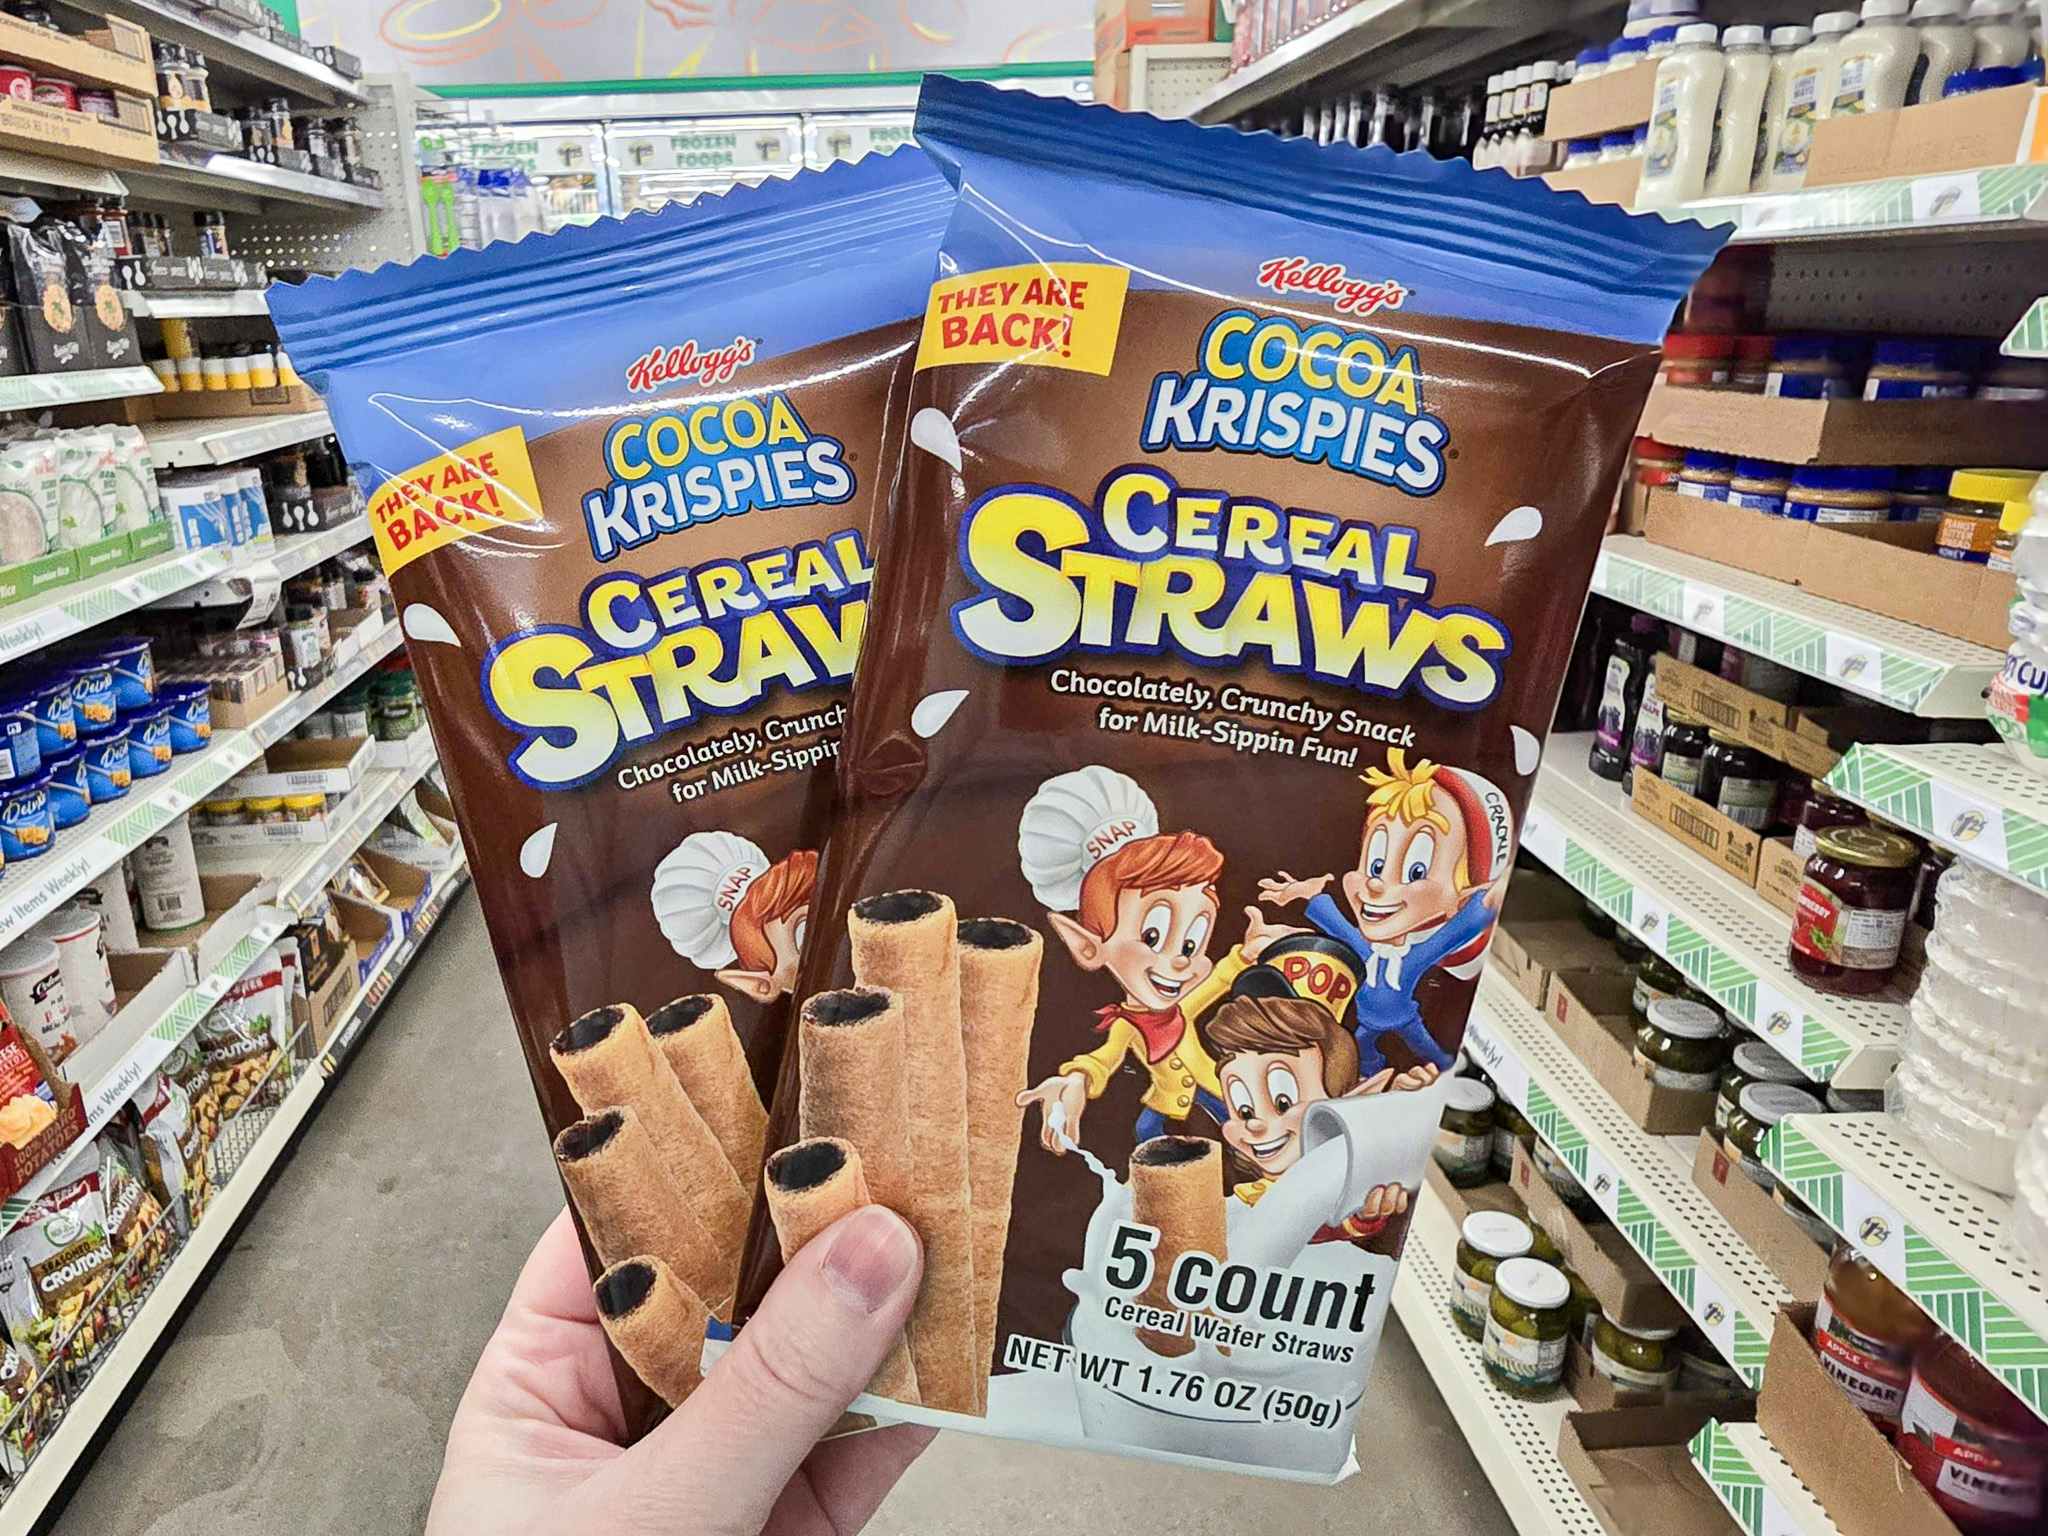 person holding 2 packs of cocoa krispies cereal straws in an aisle